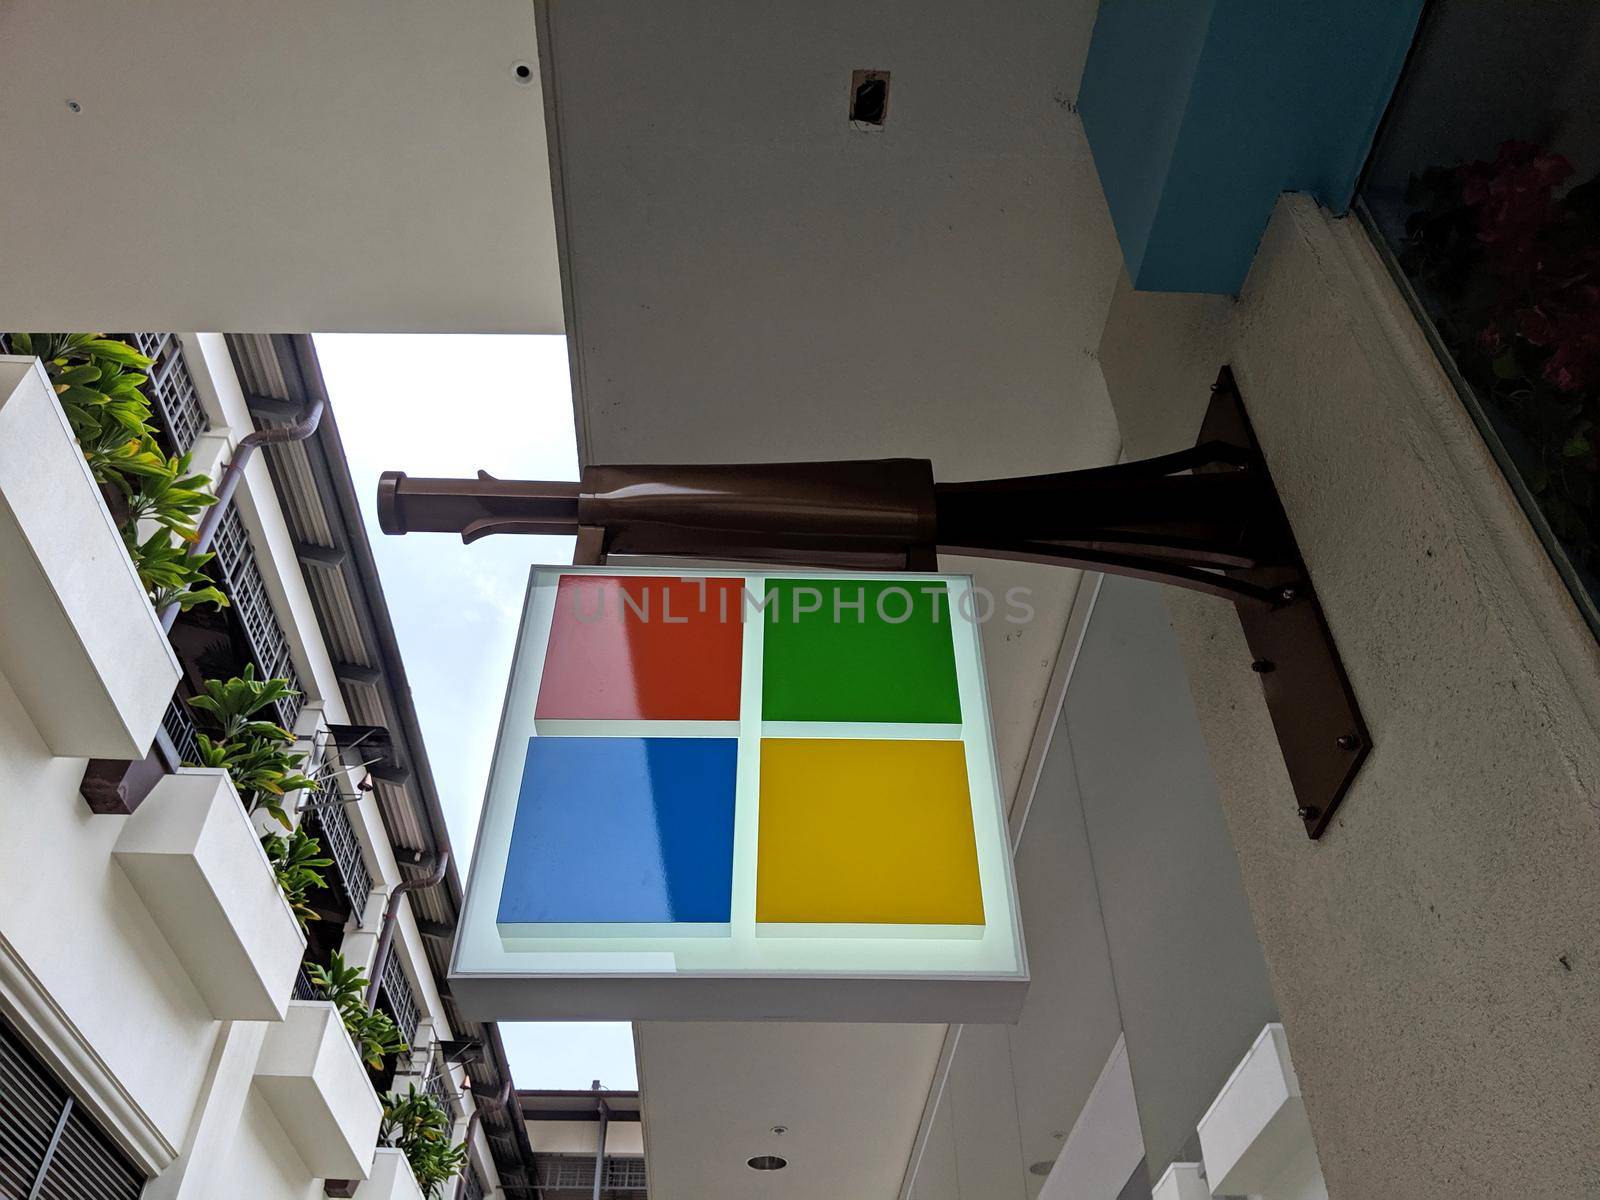 Microsoft store sign logo featuring window with four colors orange, blue, yellow, and green by EricGBVD